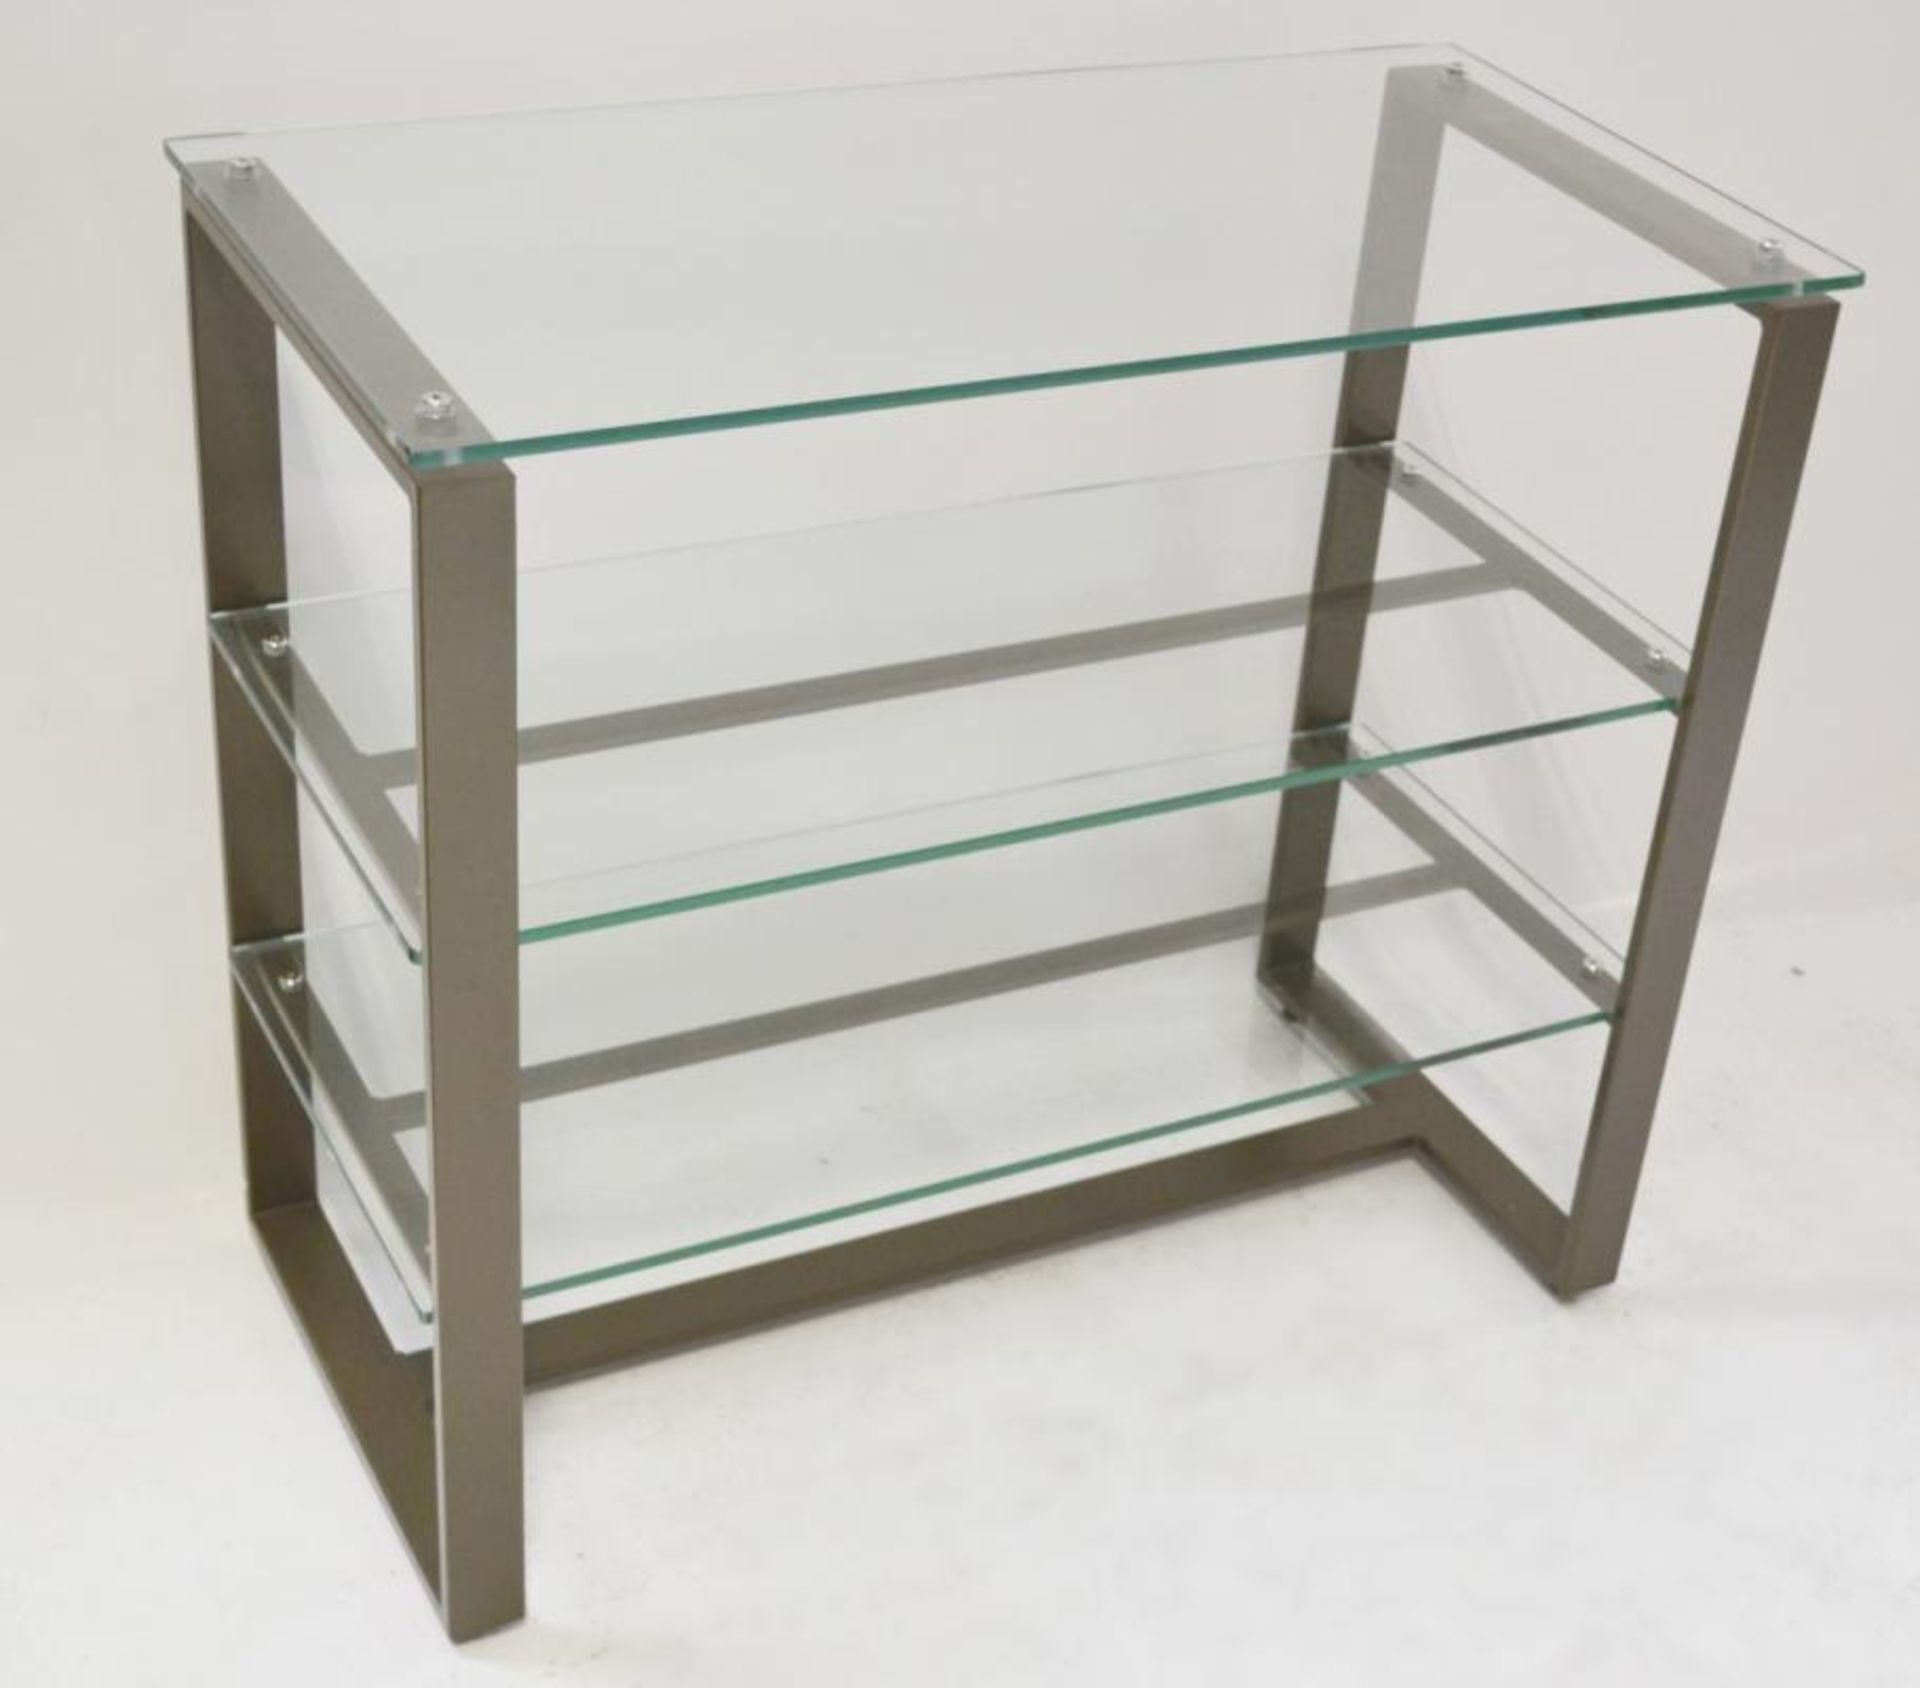 8 x Medium Contemporary Retail Glass Display Units With Sturdy Metal Frames and Three Shelves - - Image 5 of 9